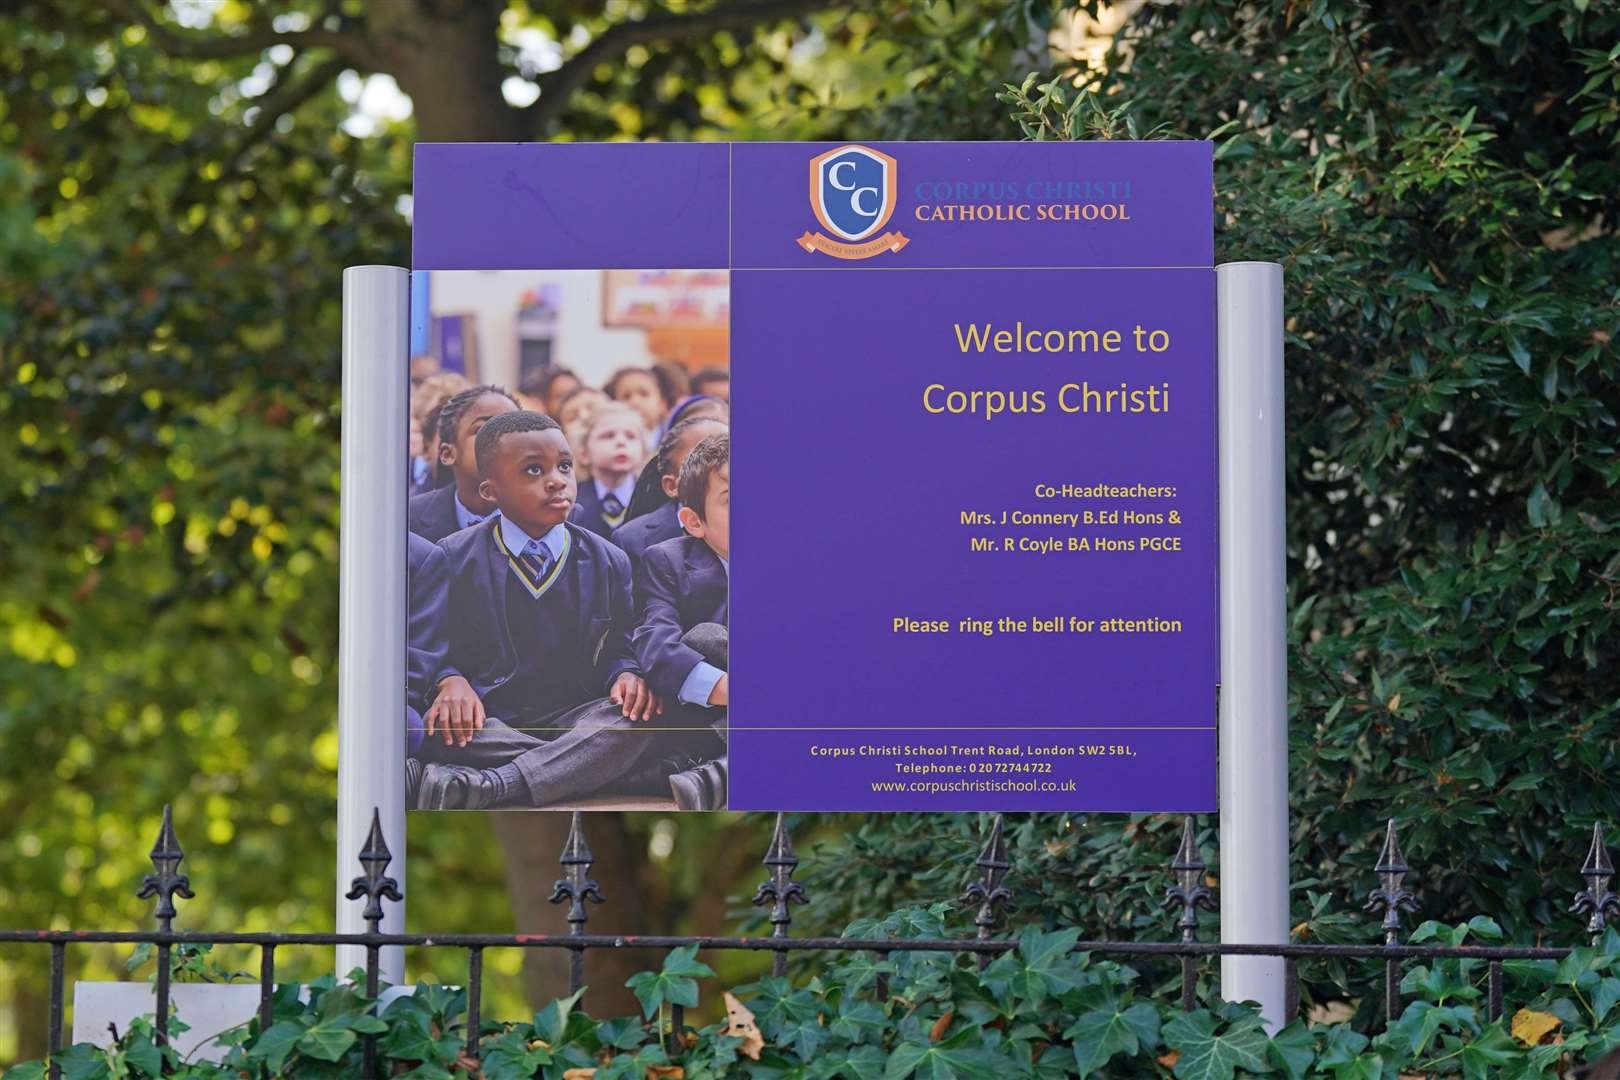 A Corpus Christi Catholic School sign had been installed at St Martin’s-in-the-Field Girls School for the relocation (Yui Mok/PA)